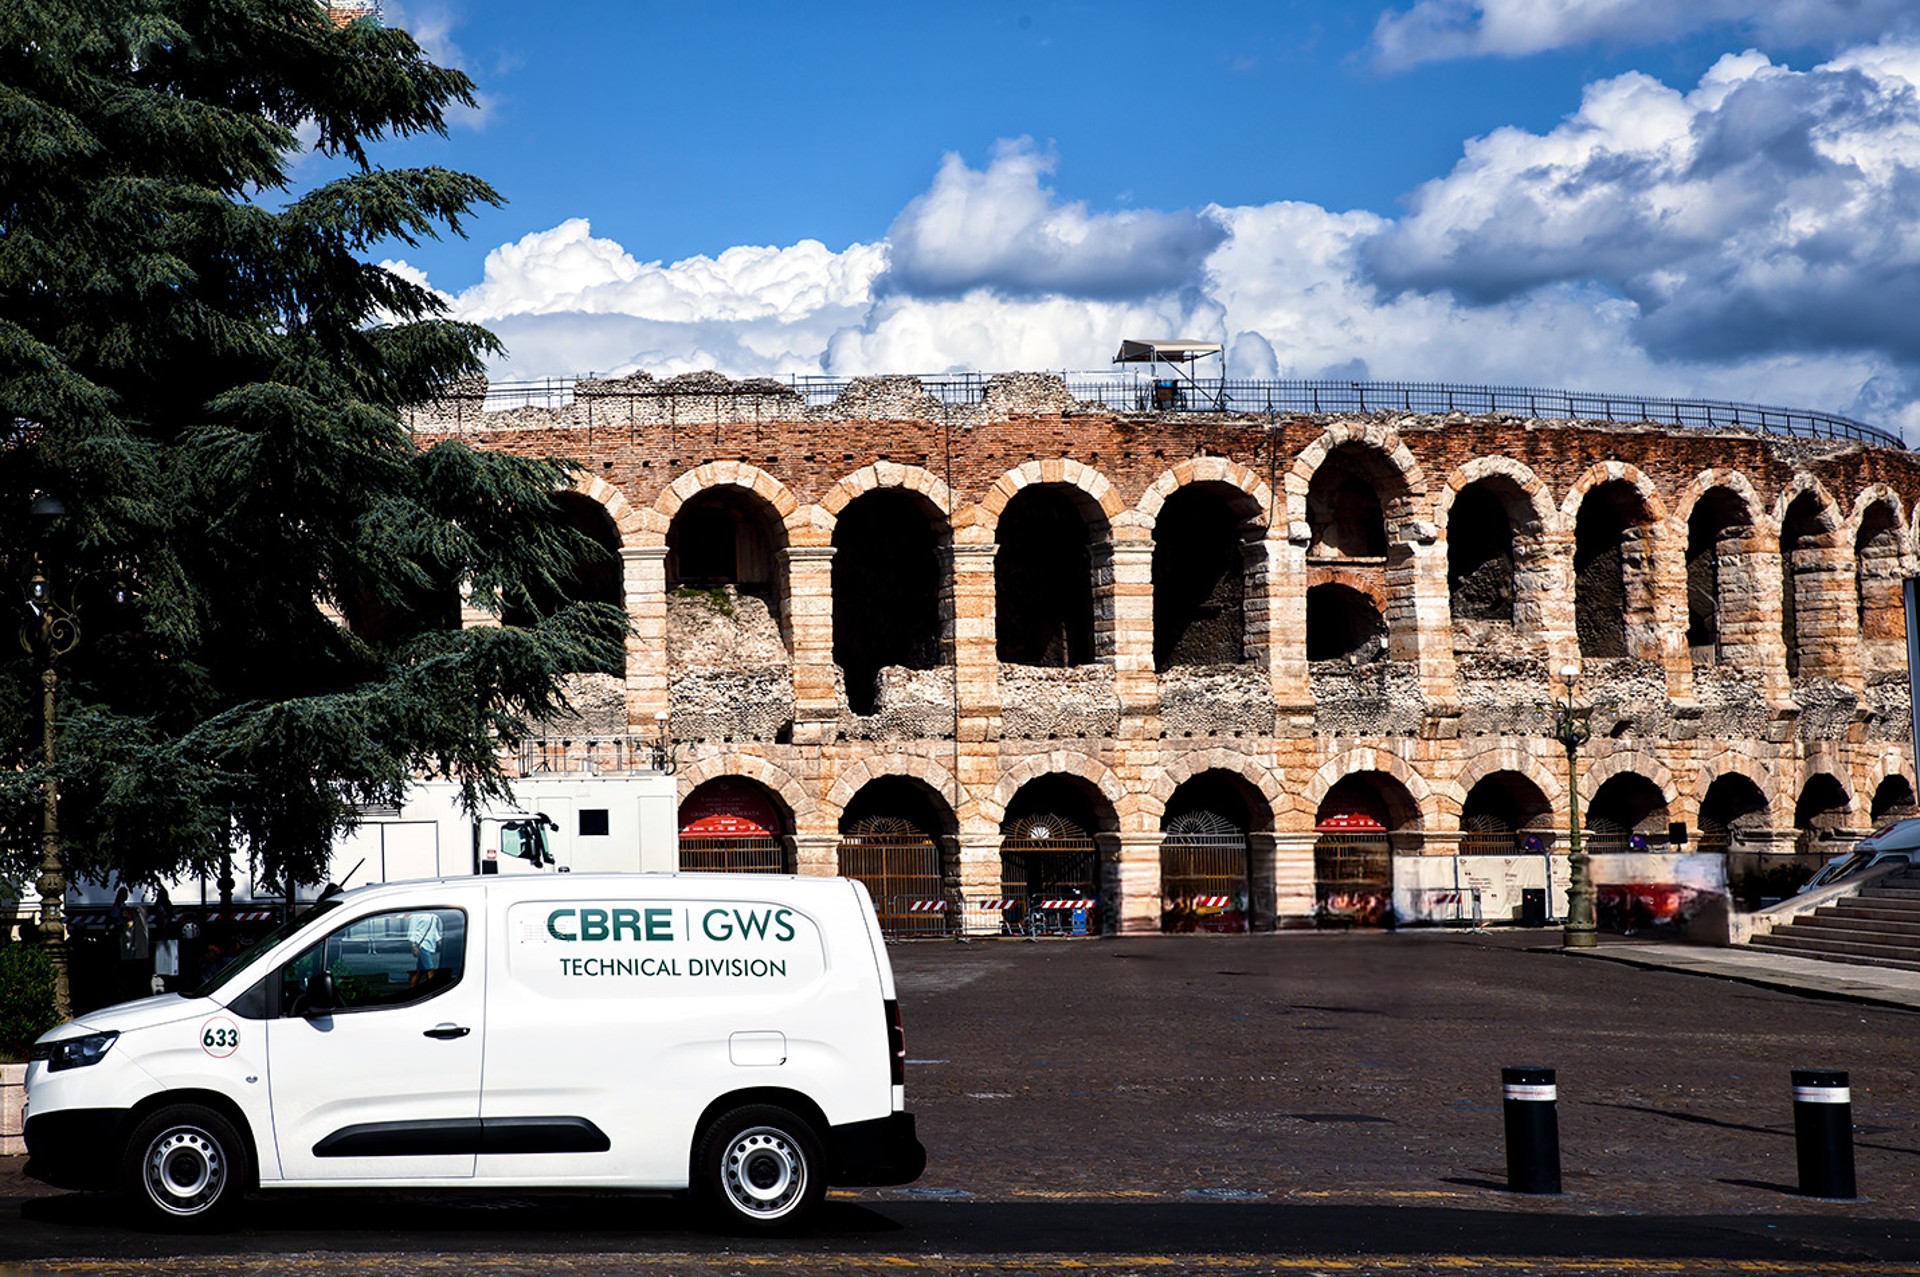 CBRE GWS car in front of the colooseum in Rome